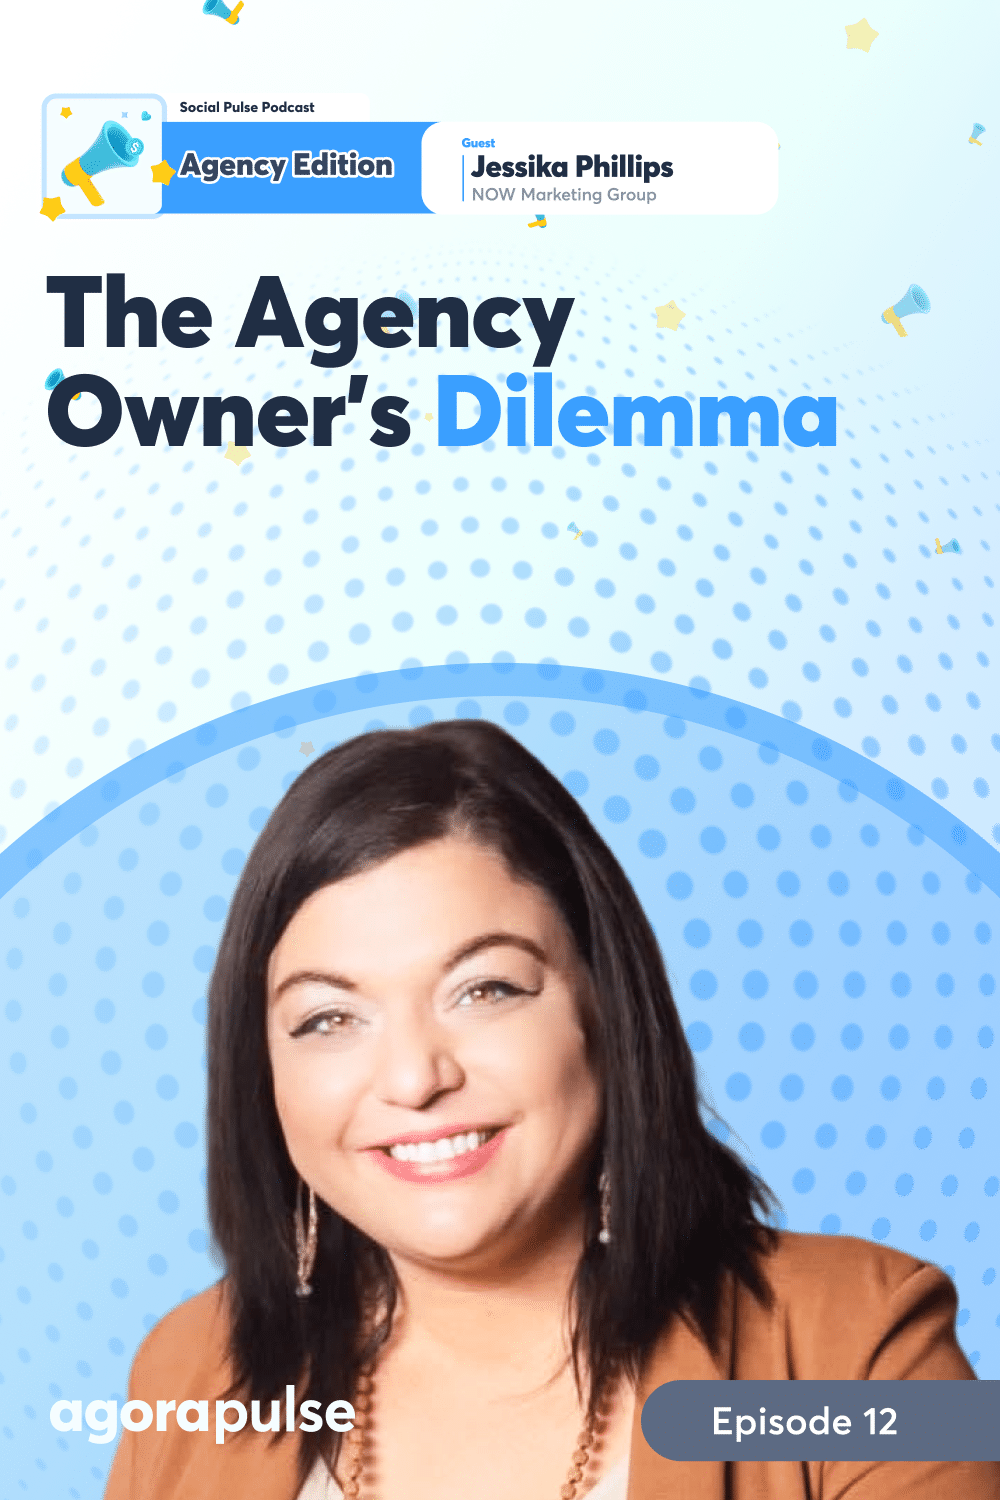 The Agency Owner’s Dilemma: How to Replicate Themselves